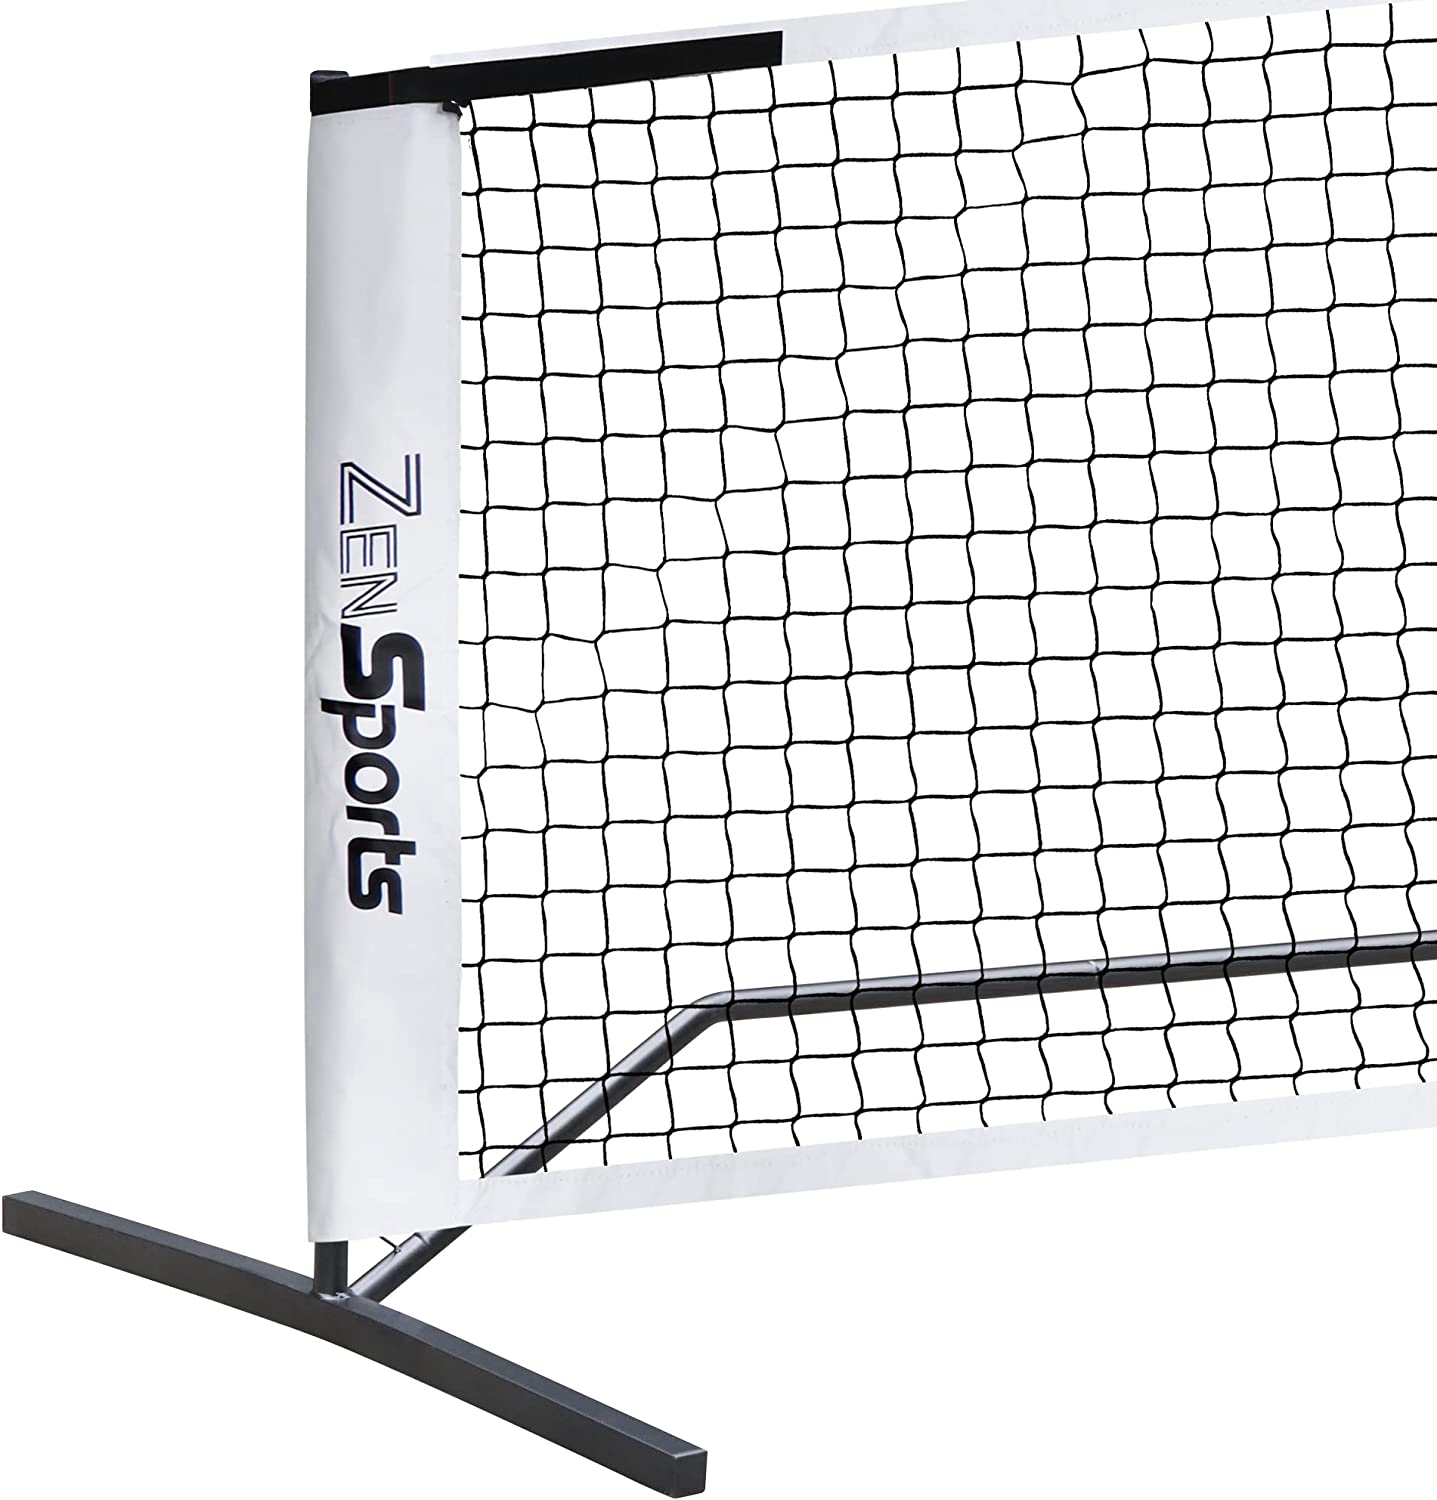 Portable Pickleball Net Set System with Metal Frame Stand and Regulation Size Net Including Carrying Bag Indoor Outdoor Game